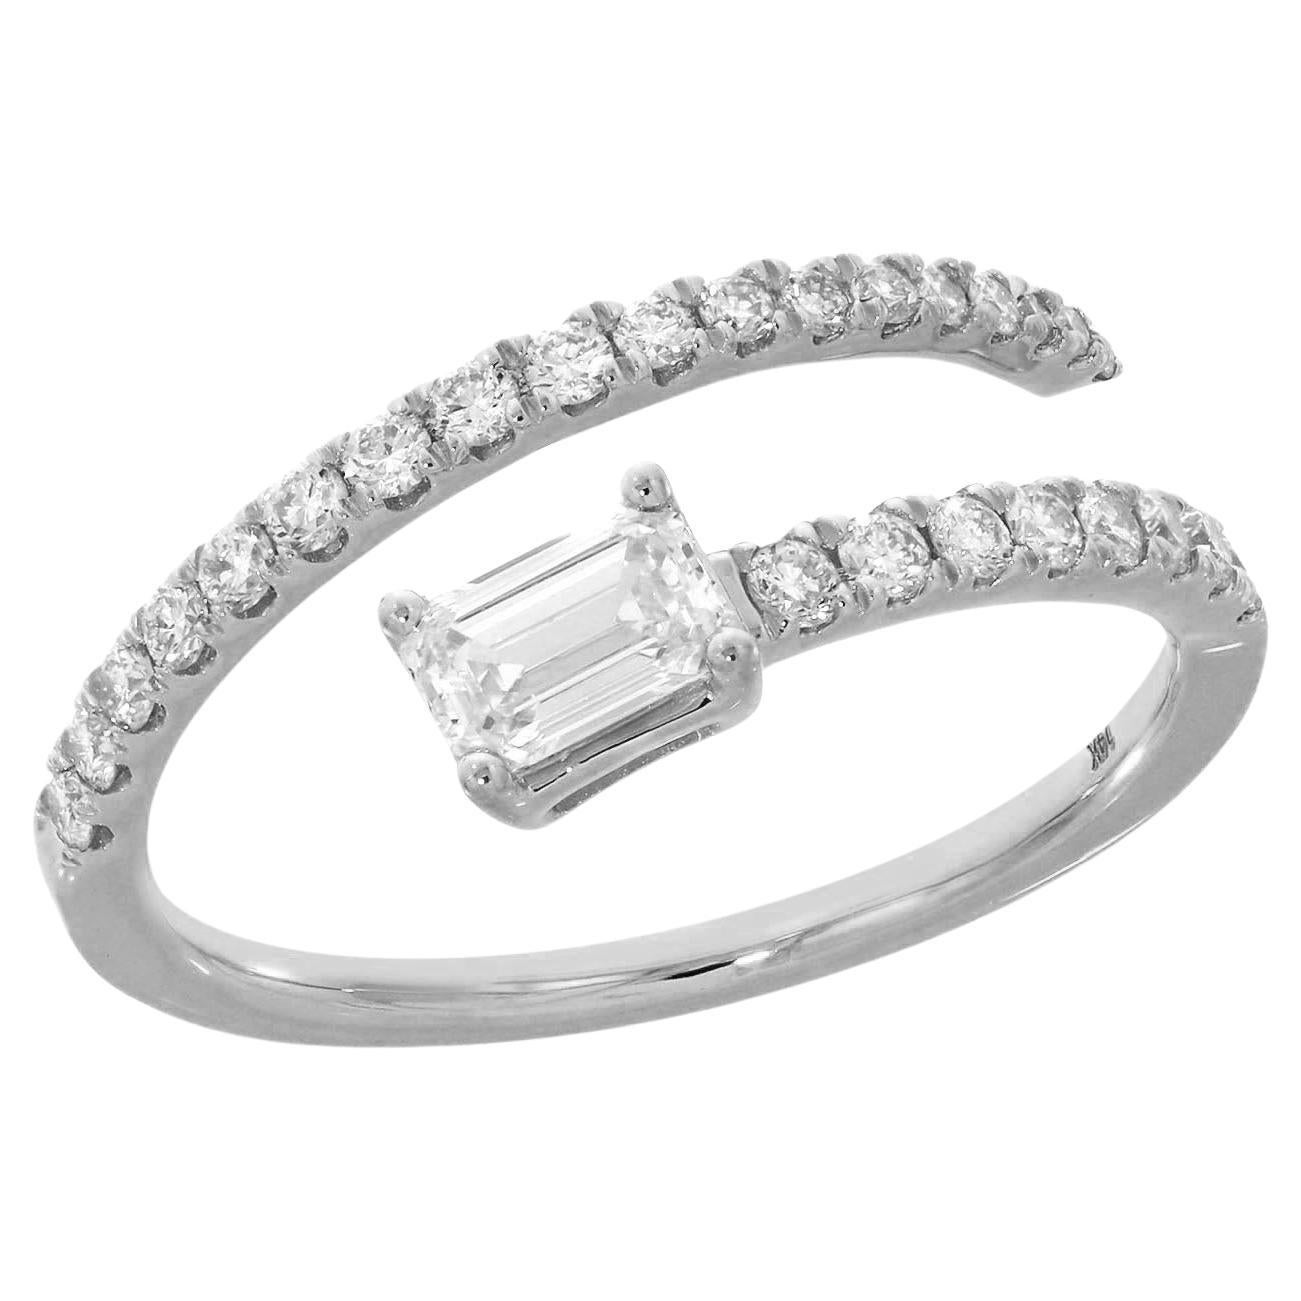 0.61 Ct Diamond Wrap Band Ring Made In 14k White Gold For Sale